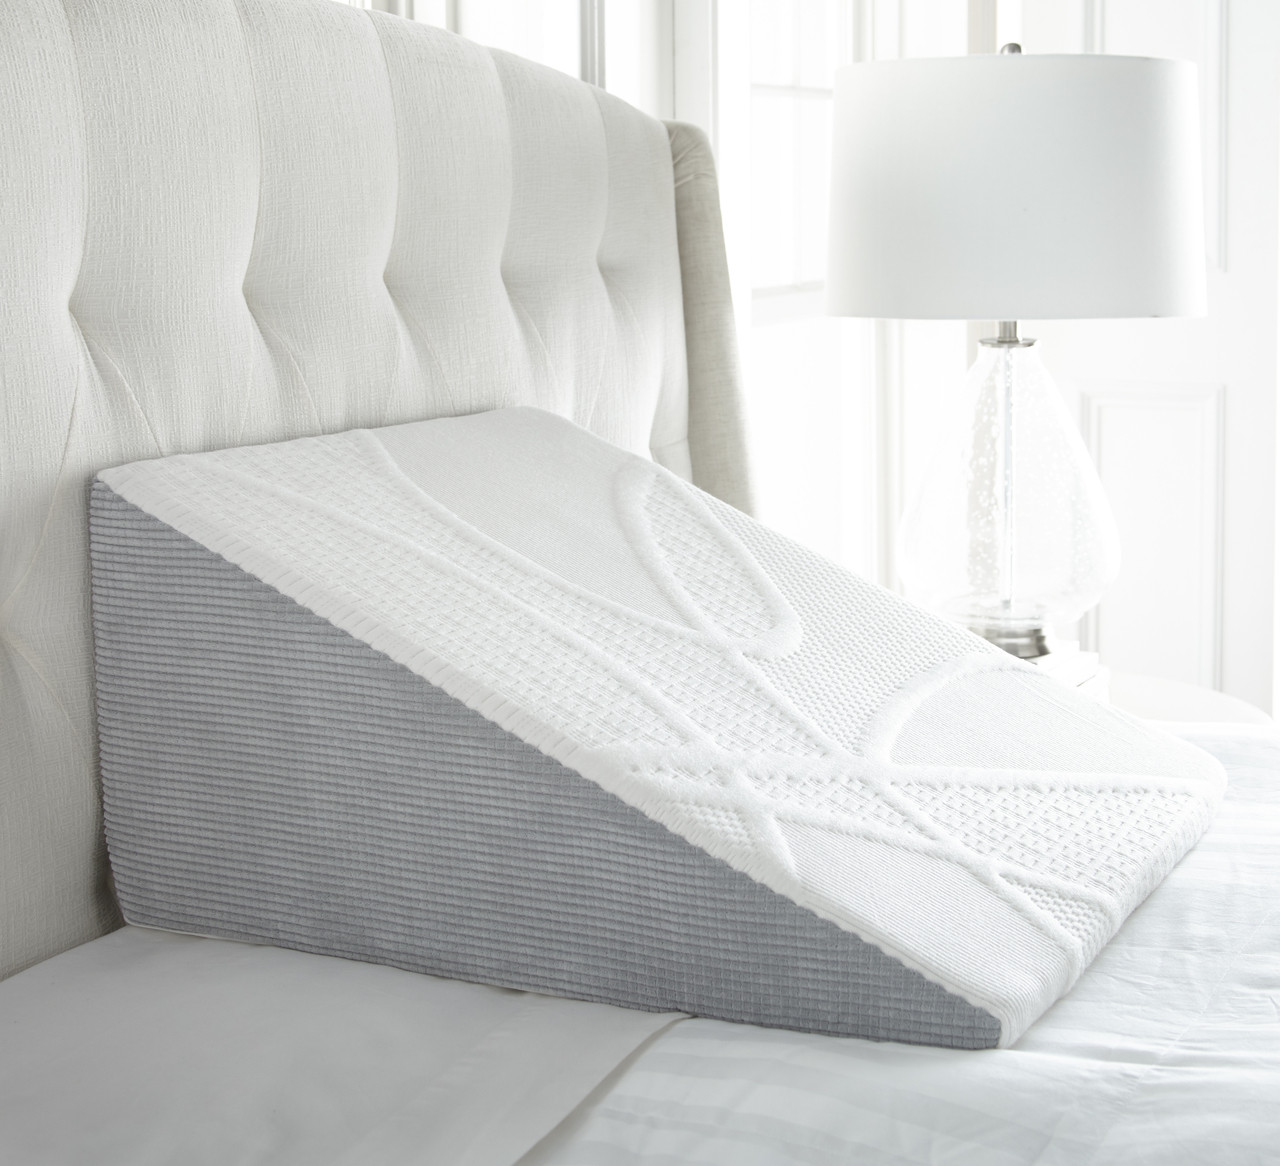 5 Benefits of Bed Wedge Pillows (And How to Use One) - Perfect Cloud